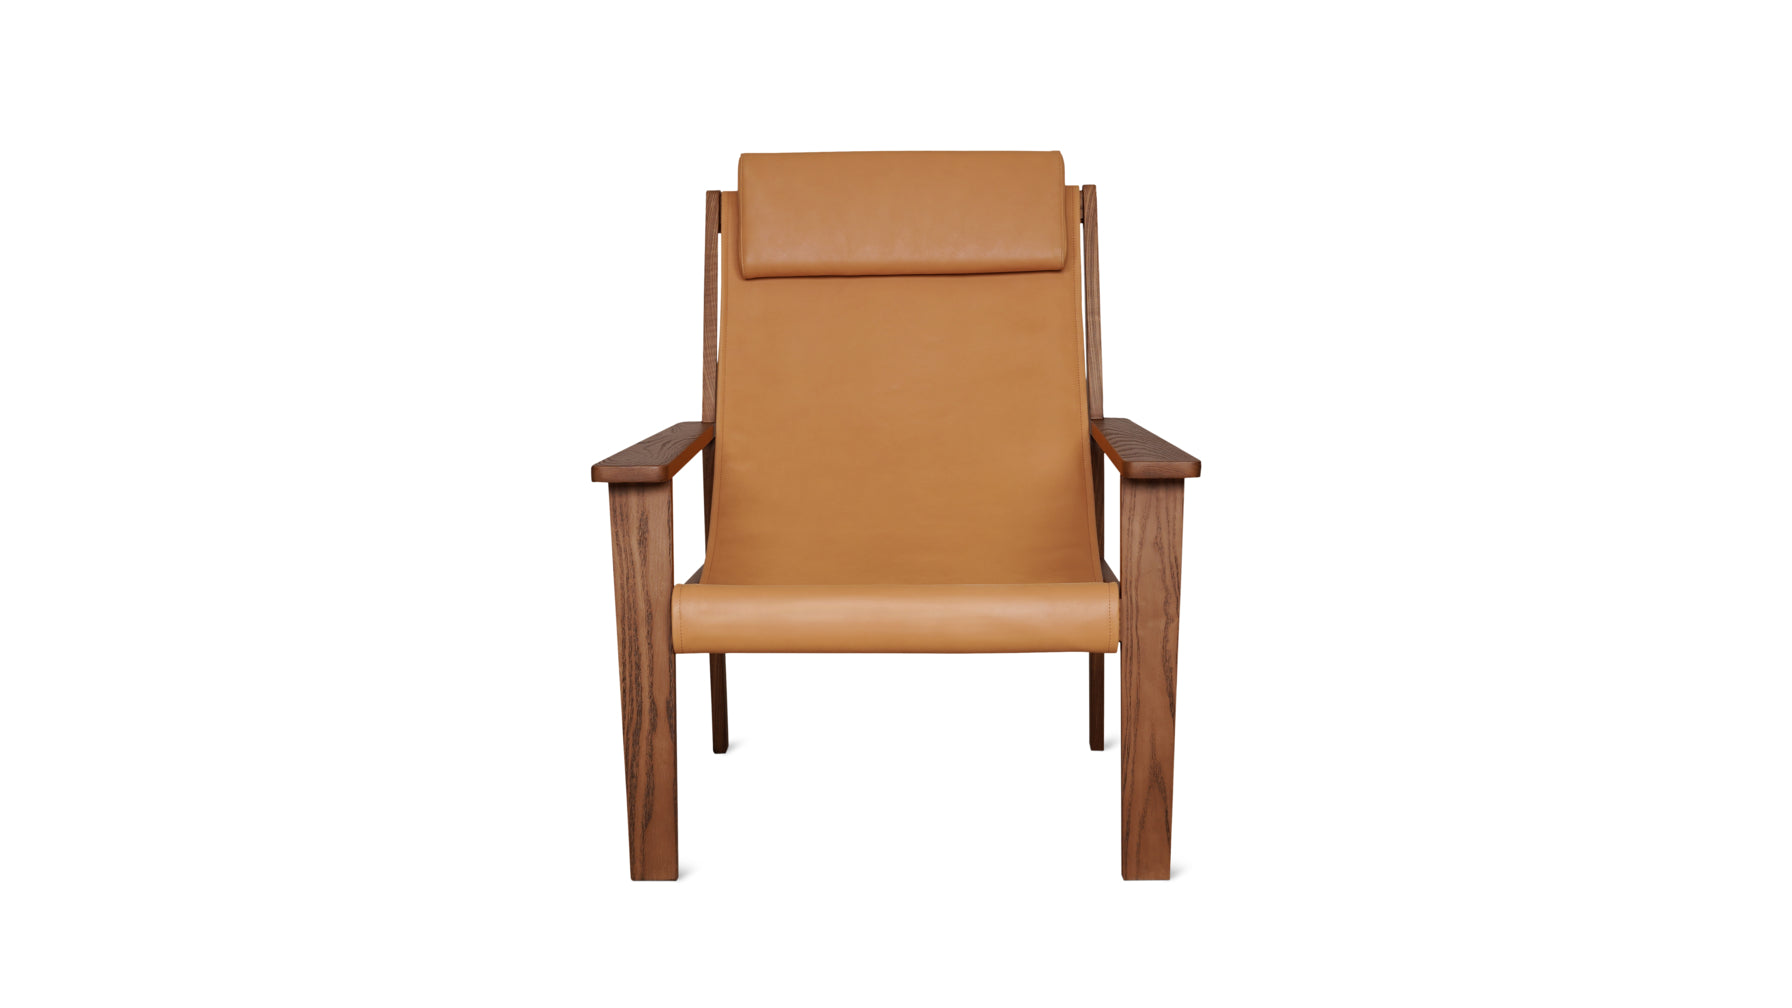 Sweet Life Sling Lounge Chair With Headrest, Terracotta Walnut - Image 1